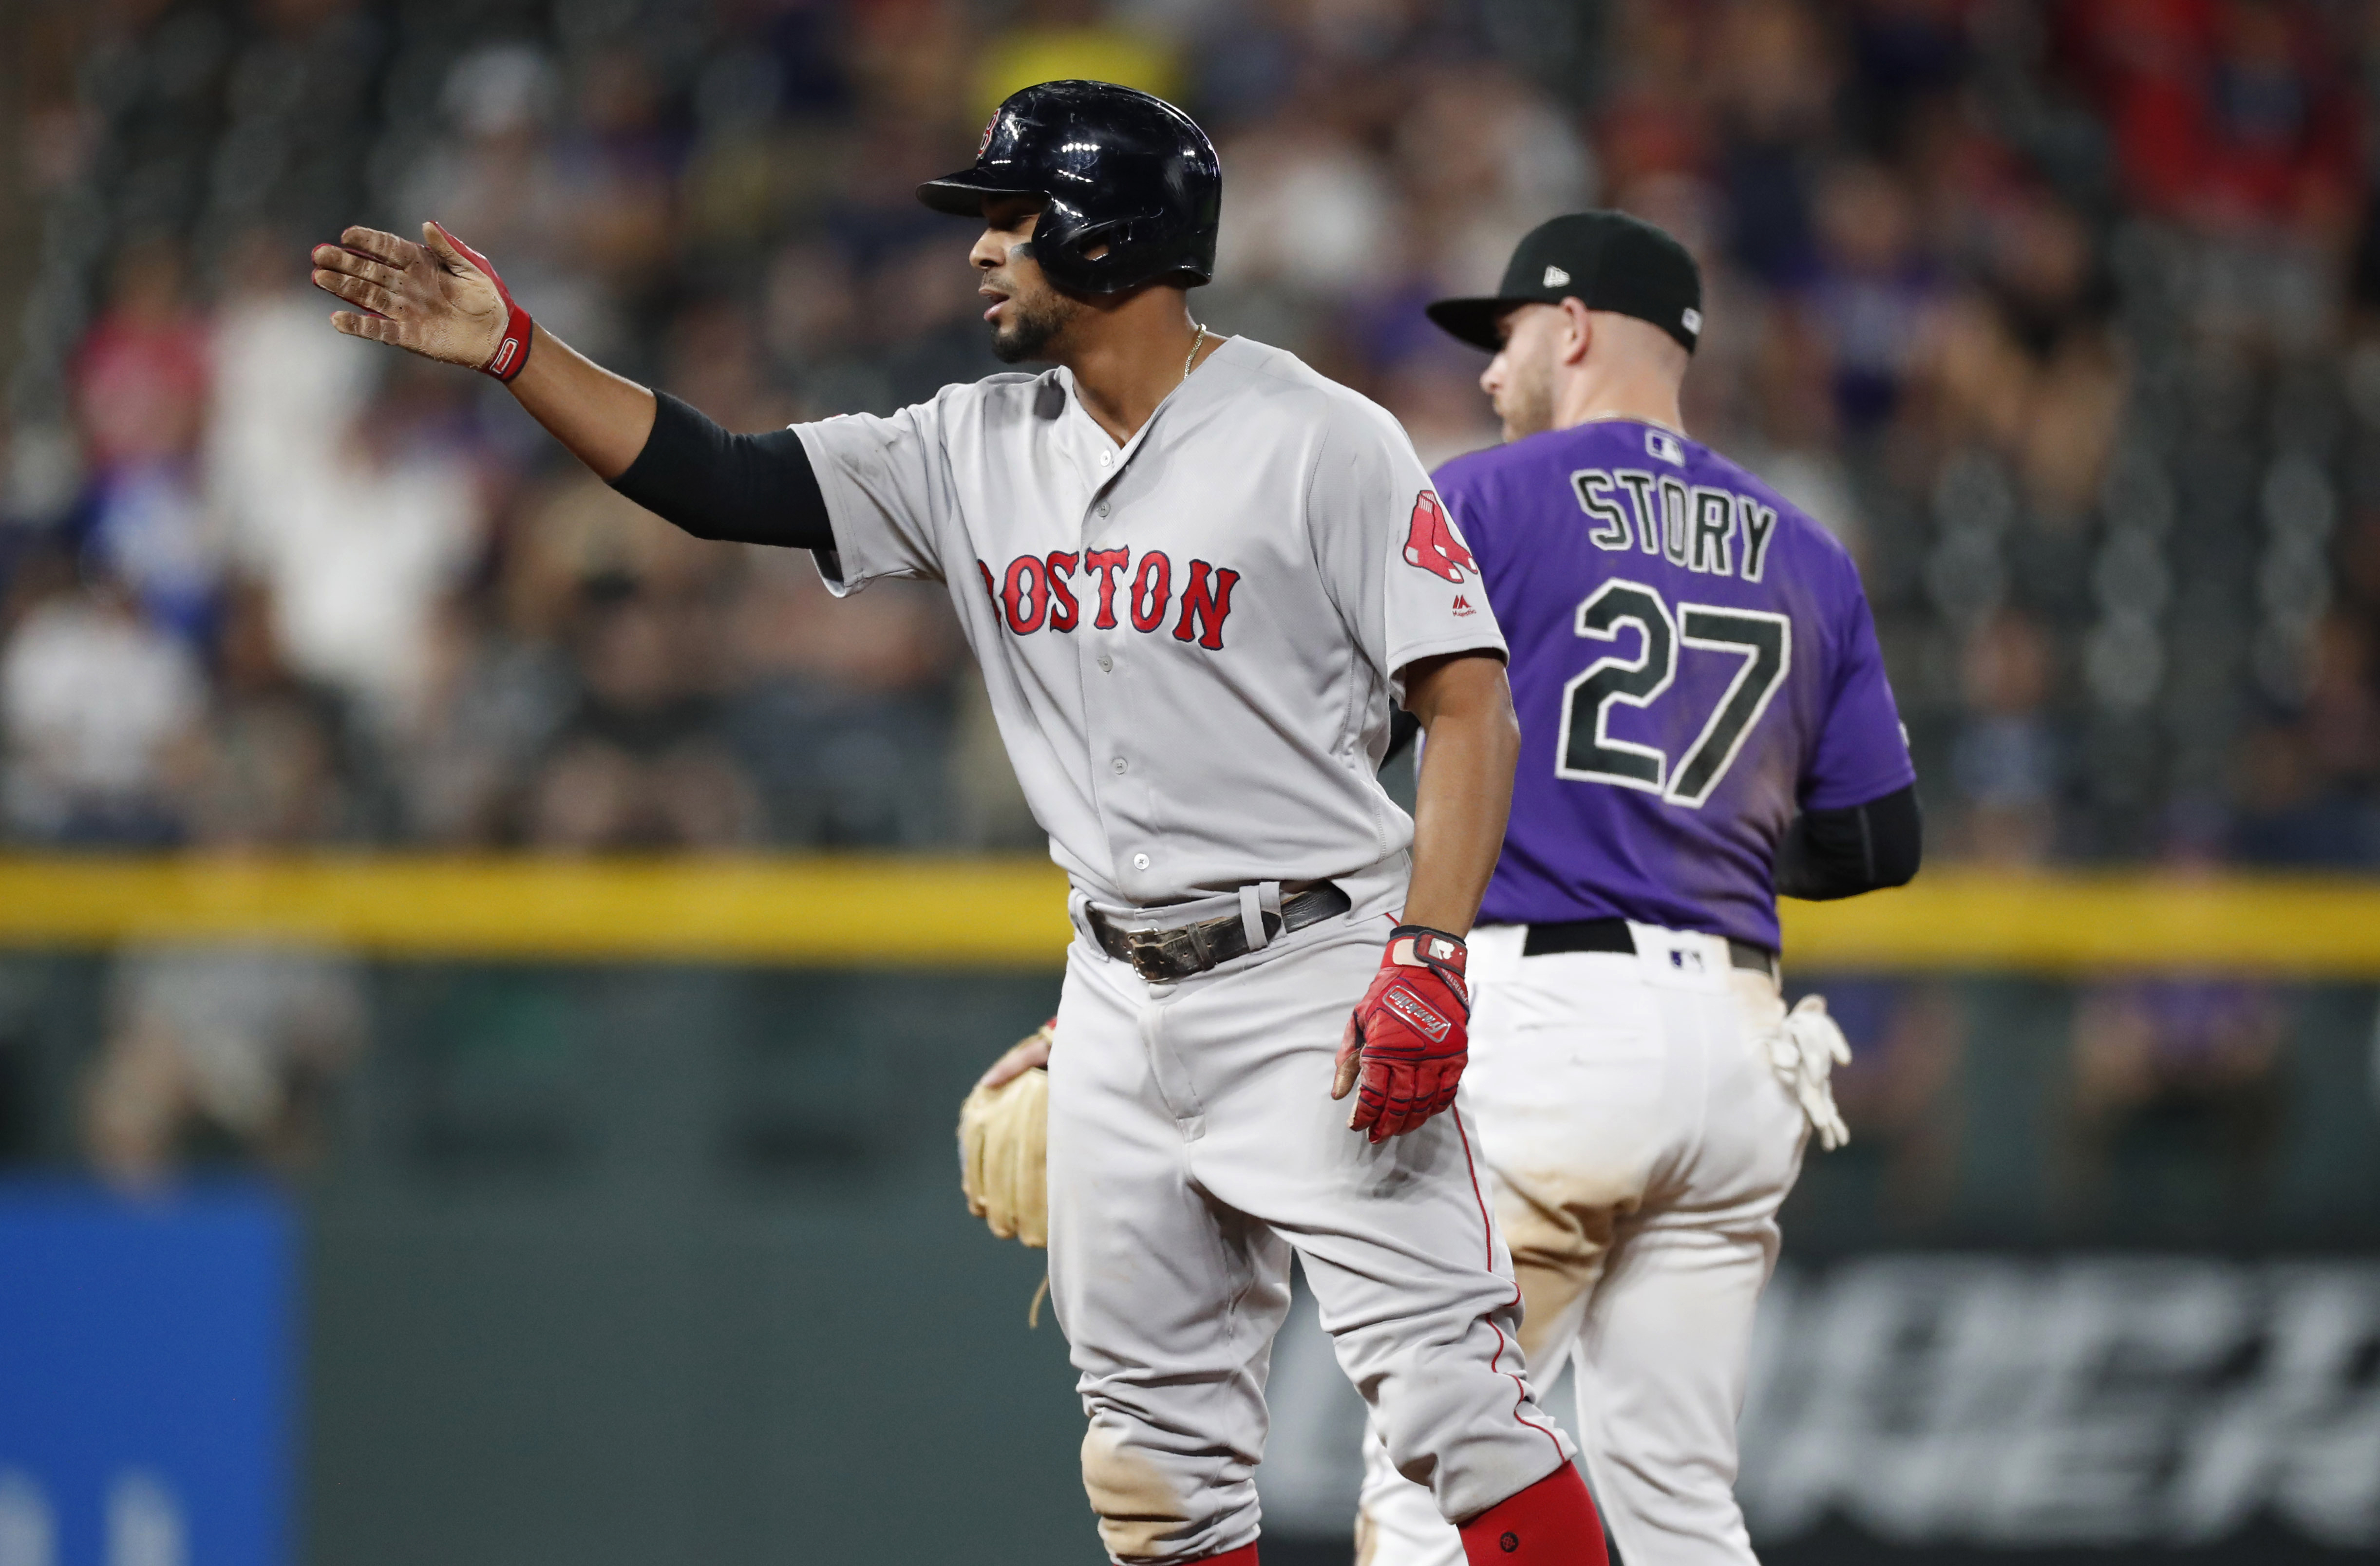 Red Sox shortstop Xander Bogaerts is unbelievably underrated